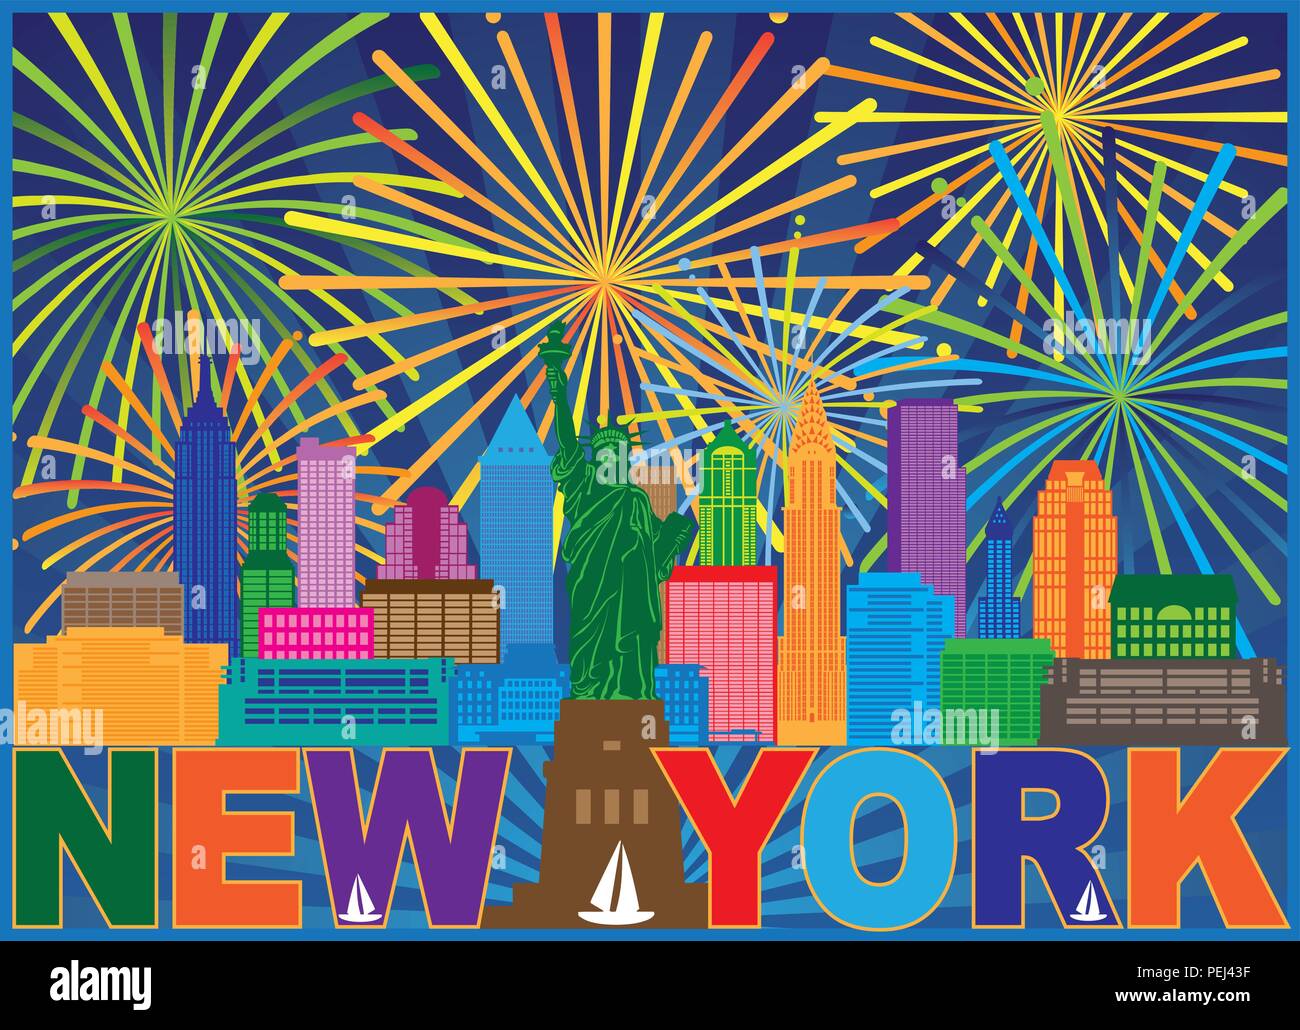 New York City Skyline with Statue of Liberty Fireworks and text color Outline Illustration Stock Vector